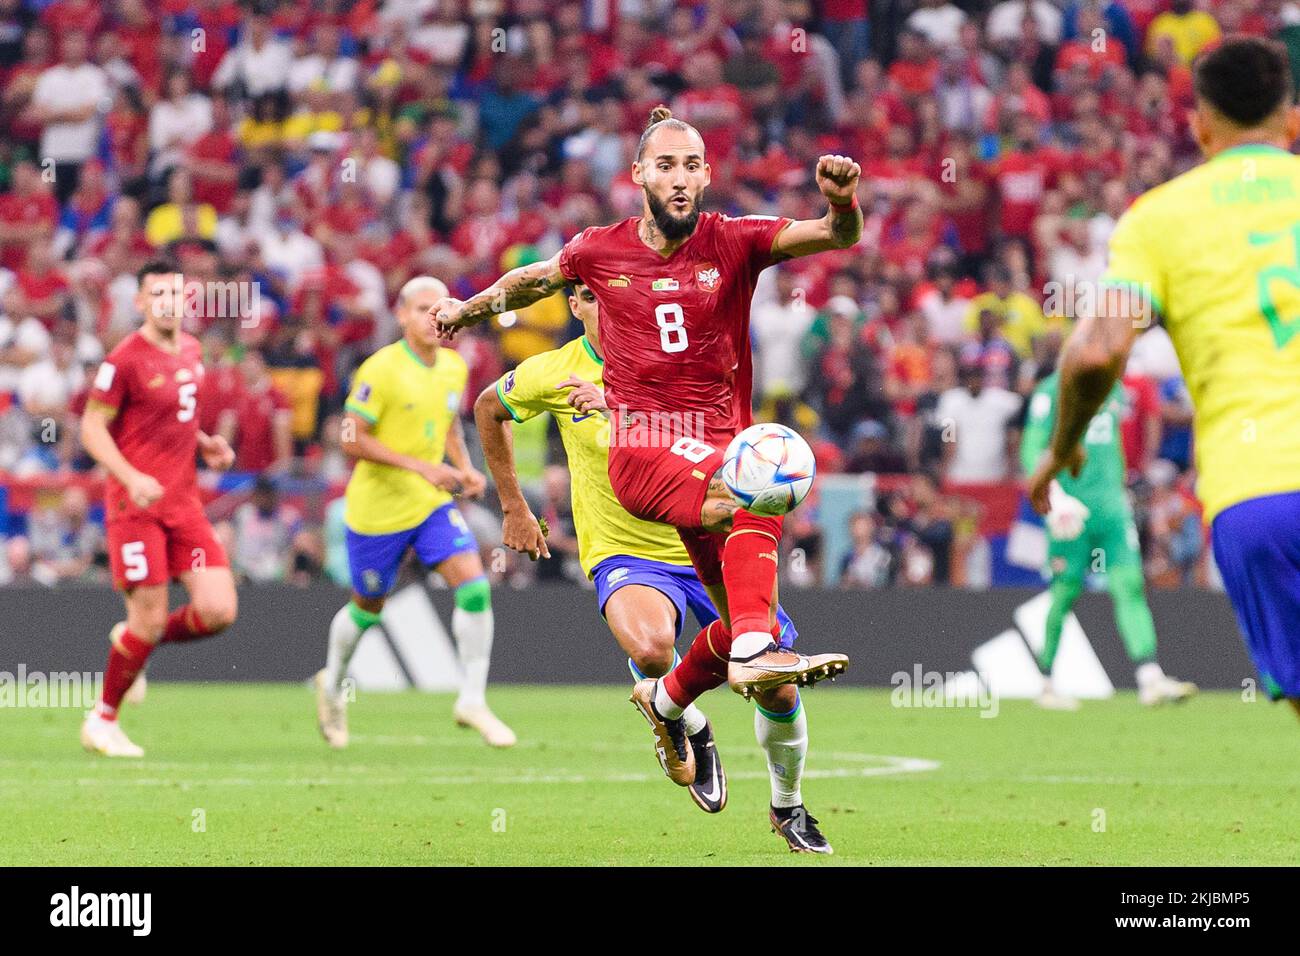 Lusail, Qatar. 24th Nov, 2022. Lusail, Qatar, Nov 25th 2022: Nemanja Gudelj of Serbia during a match between Brazil vs Serbia, valid for the group stage of the World Cup, held at the Lusail National Stadium in Lusail, Qatar. (Marcio Machado/SPP) Credit: SPP Sport Press Photo. /Alamy Live News Stock Photo